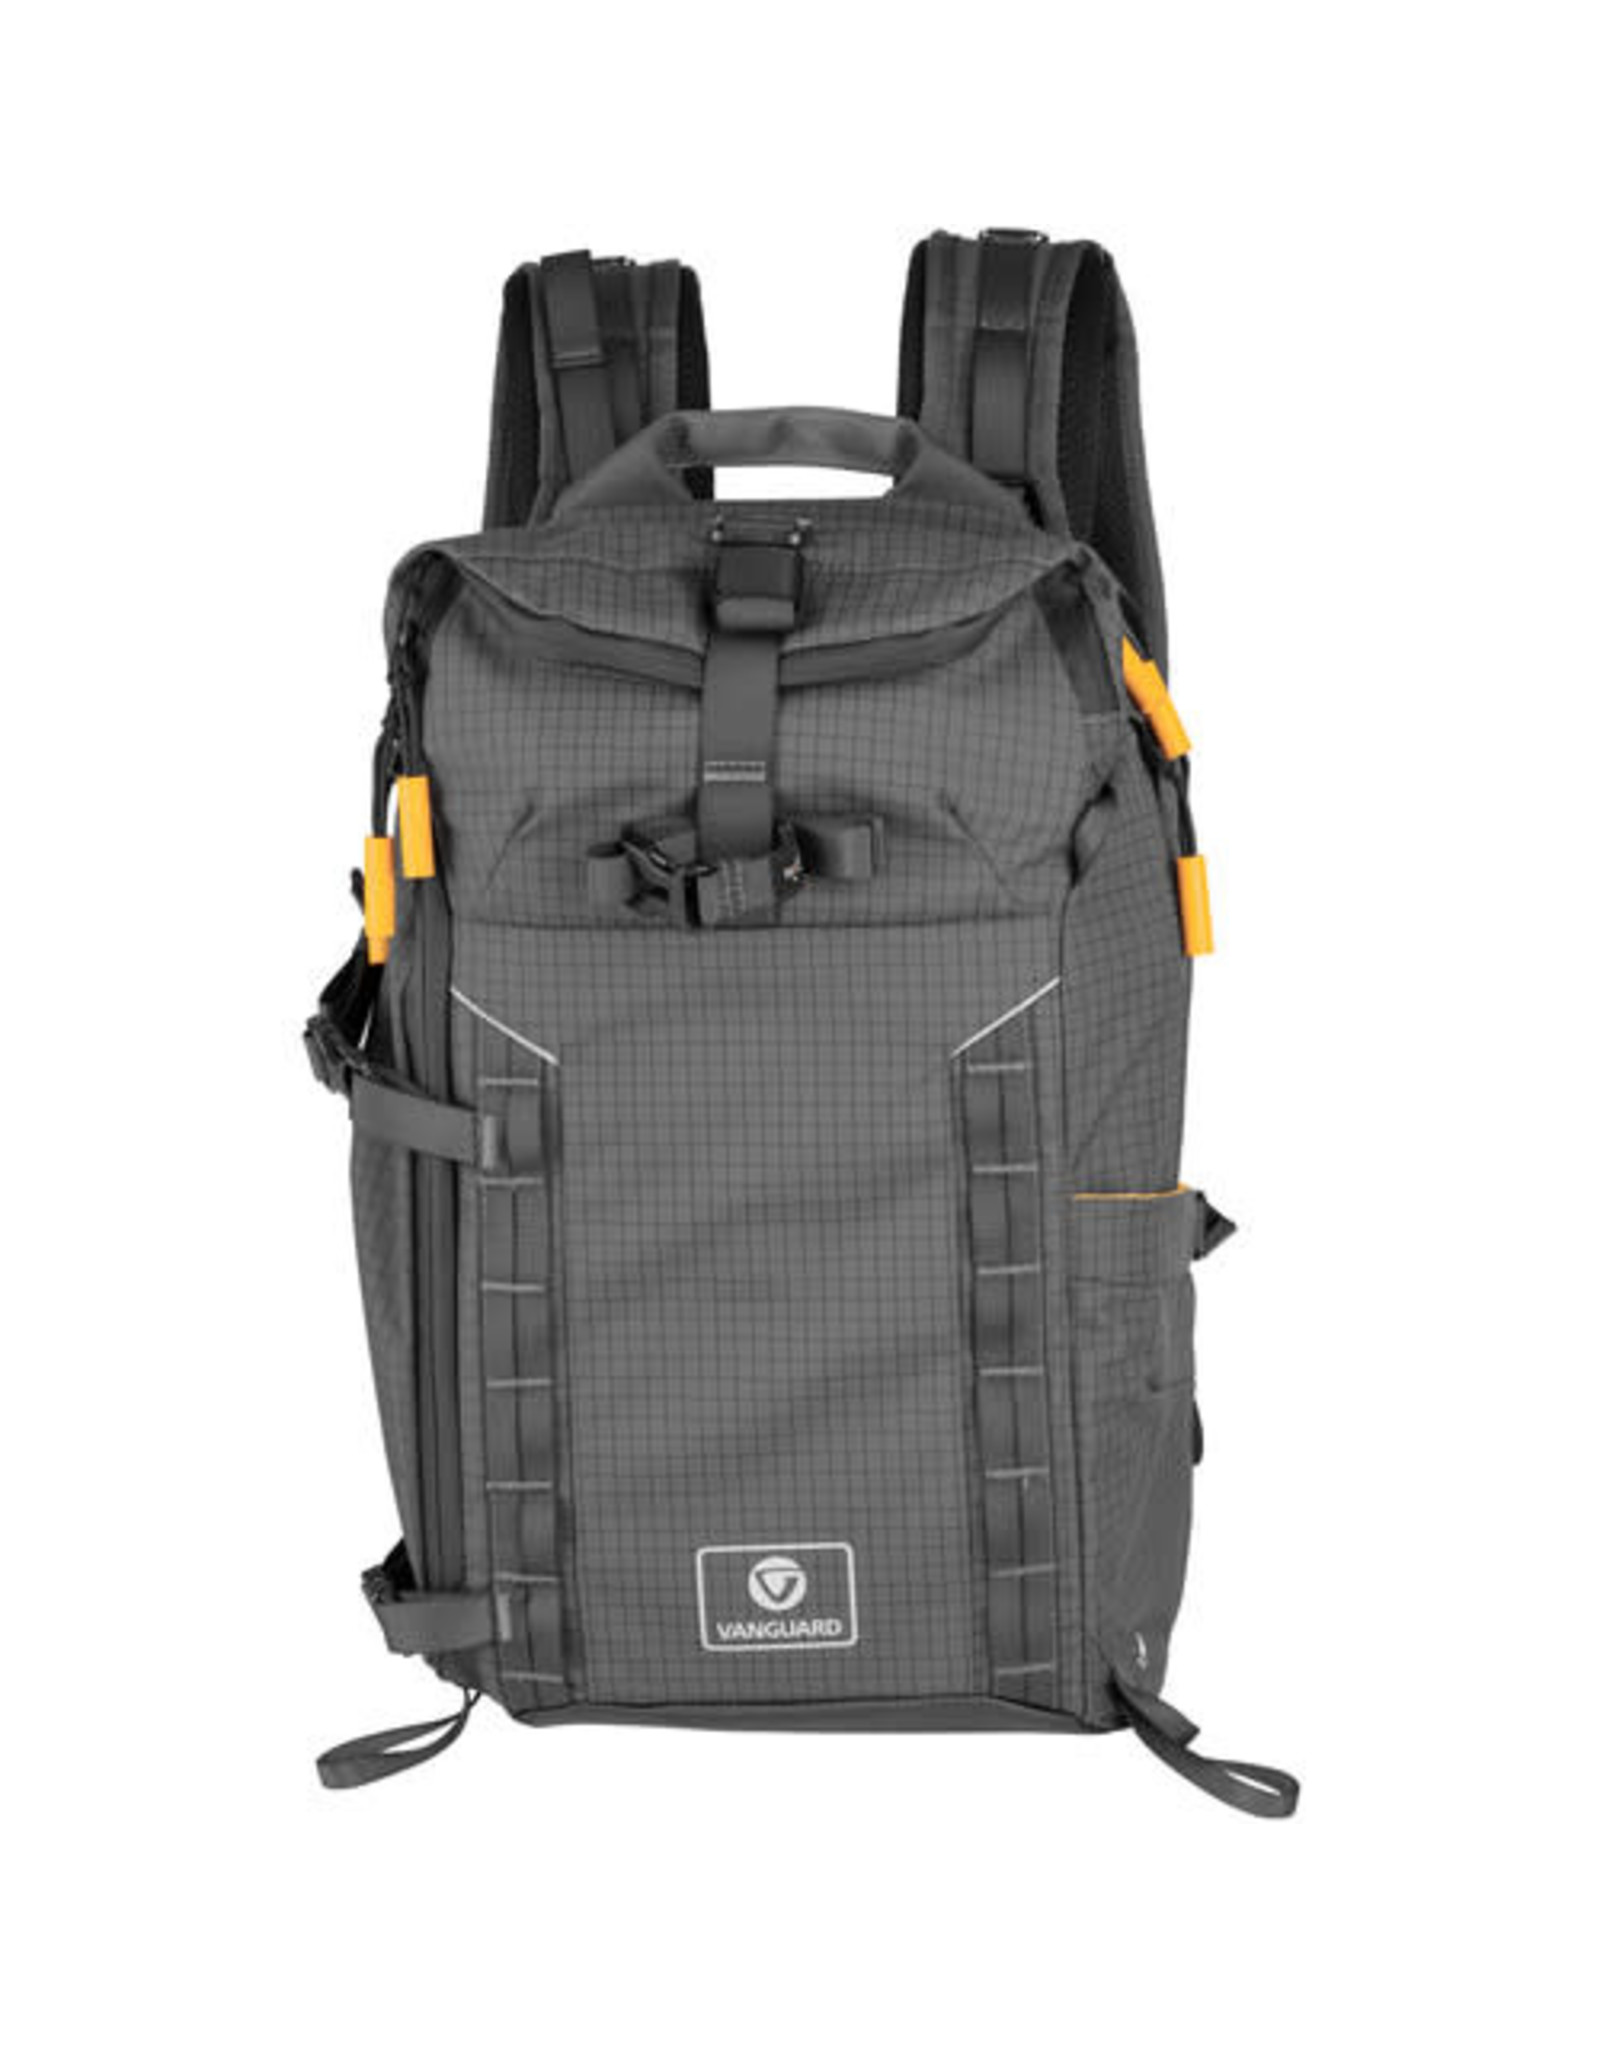 Vanguard VEO ACTIVE 46 CAMERA BACKPACK W/ USB CHARGER CONNECTOR (CHOOSE COLOR)